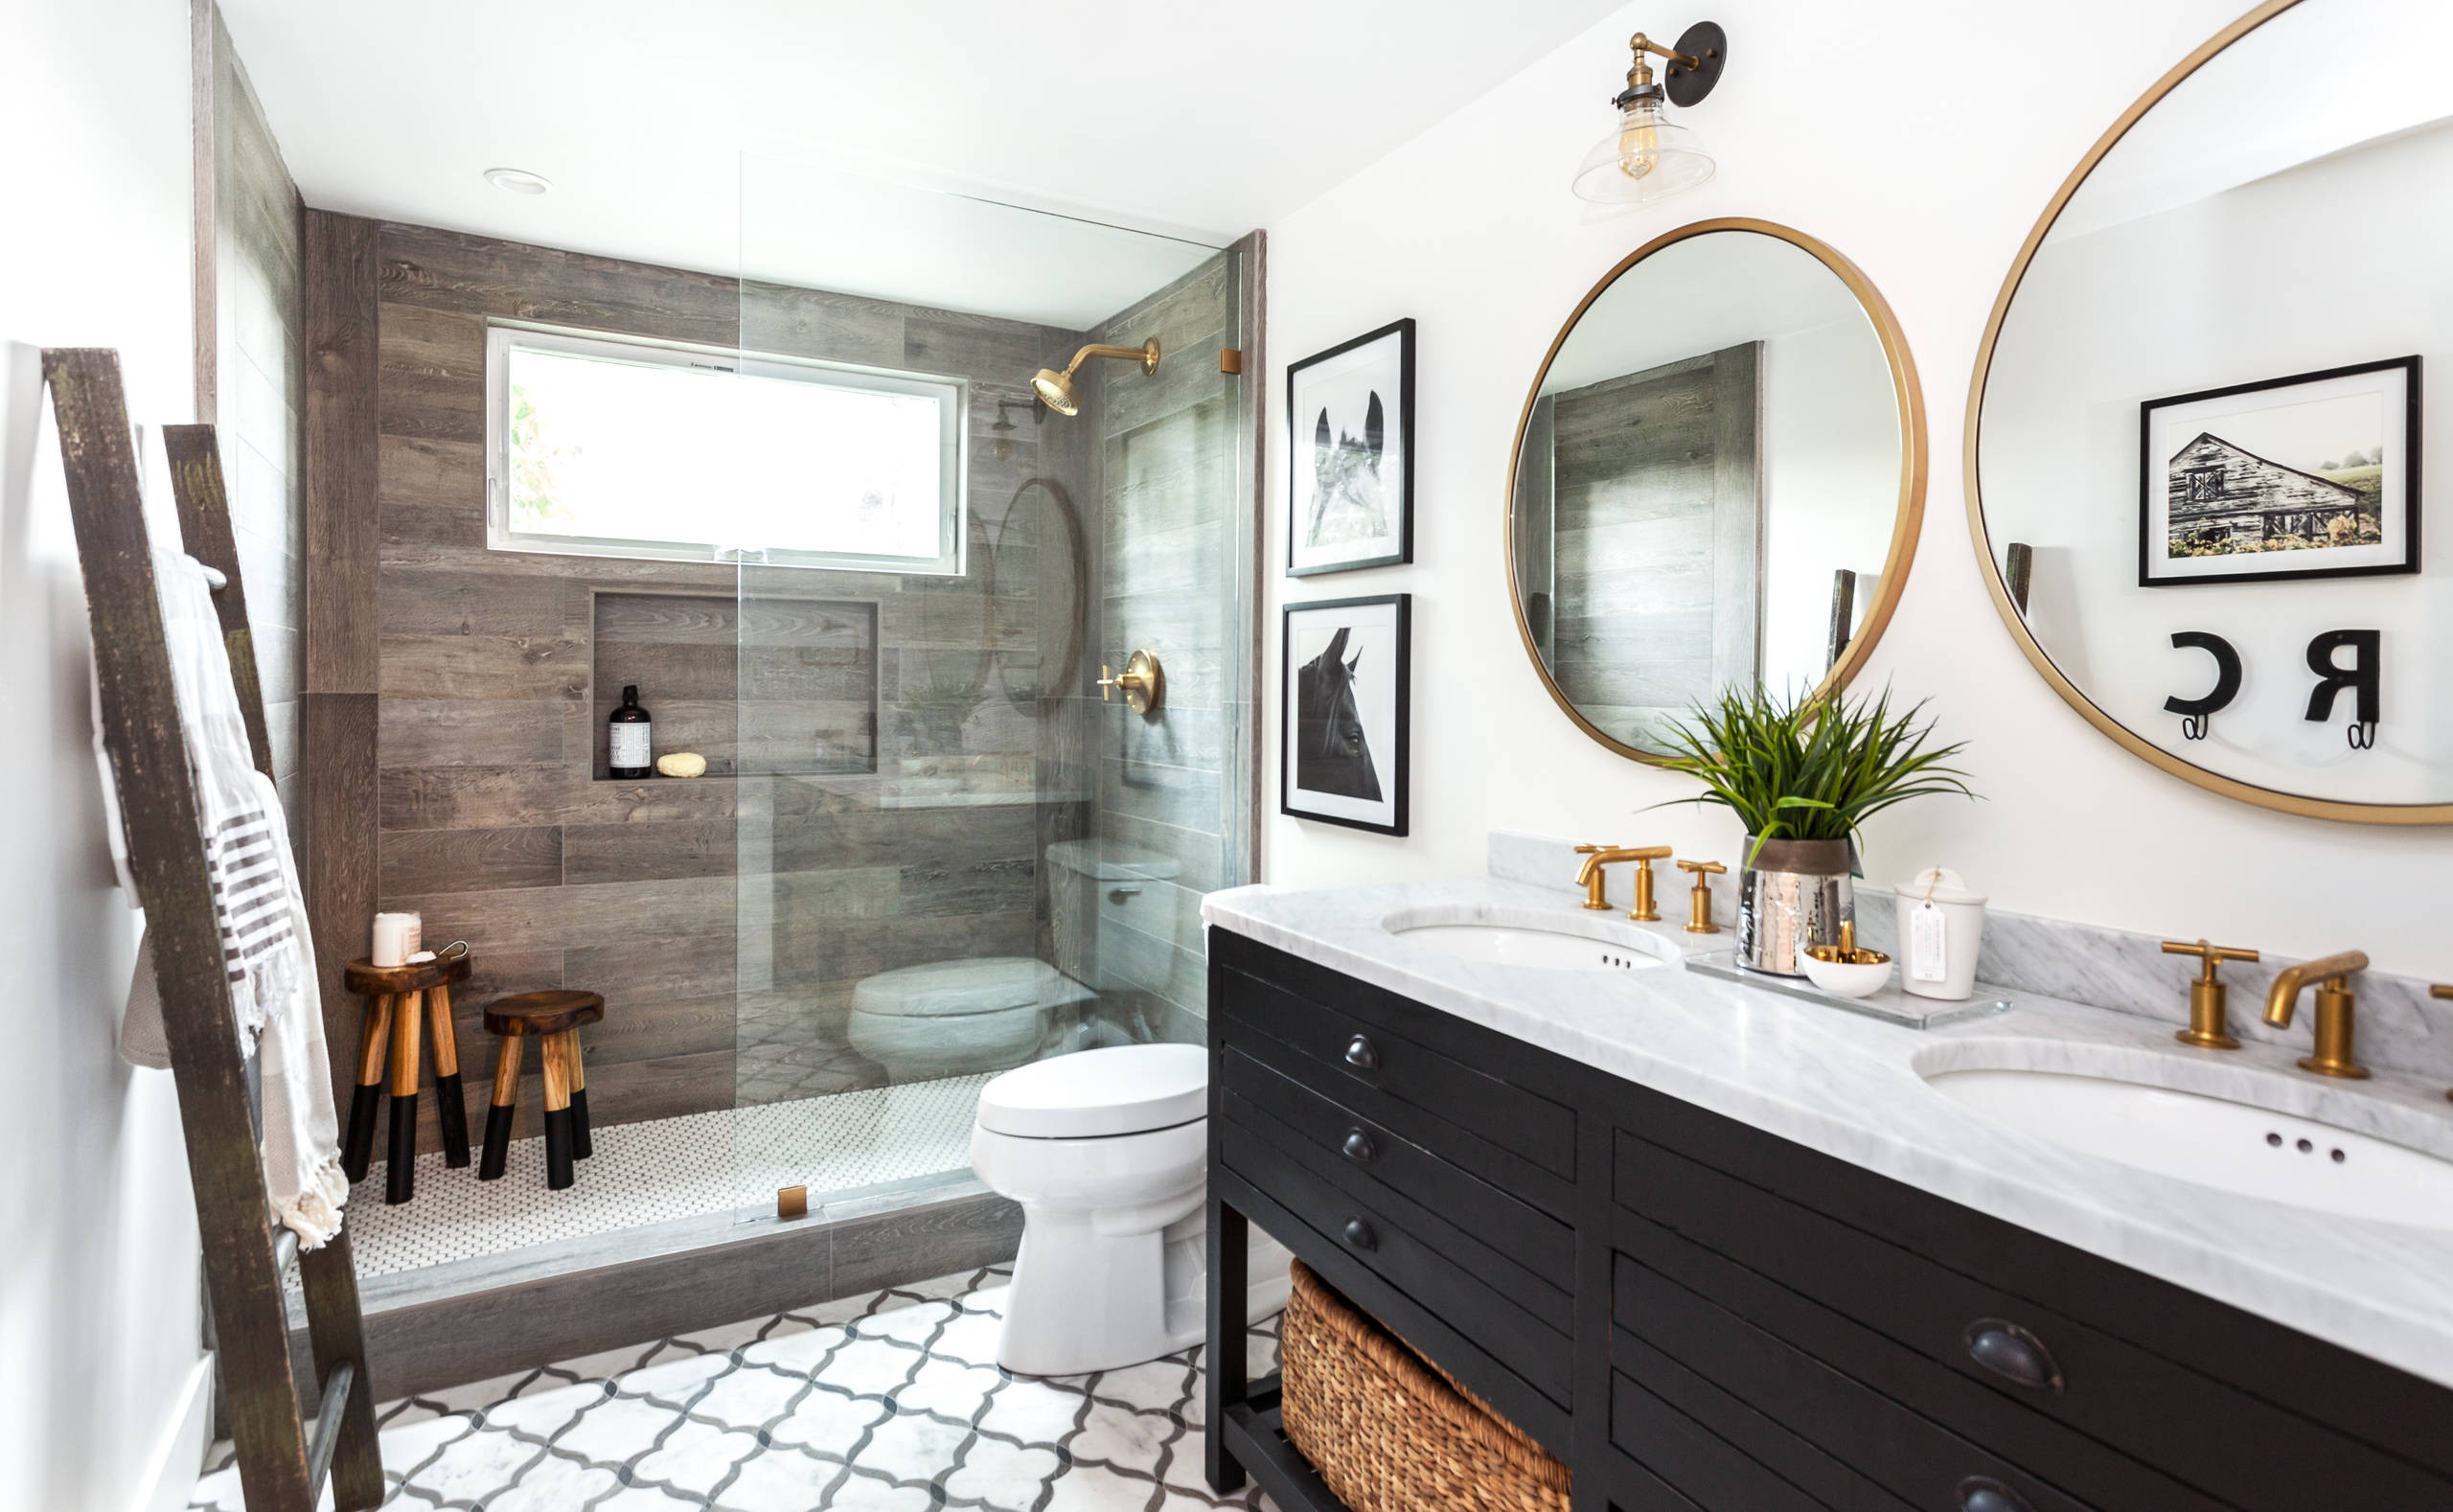 Bathroom Decor Ideas 2020
 2020 Tips and Tricks for Your Best Bathroom Remodel Yet